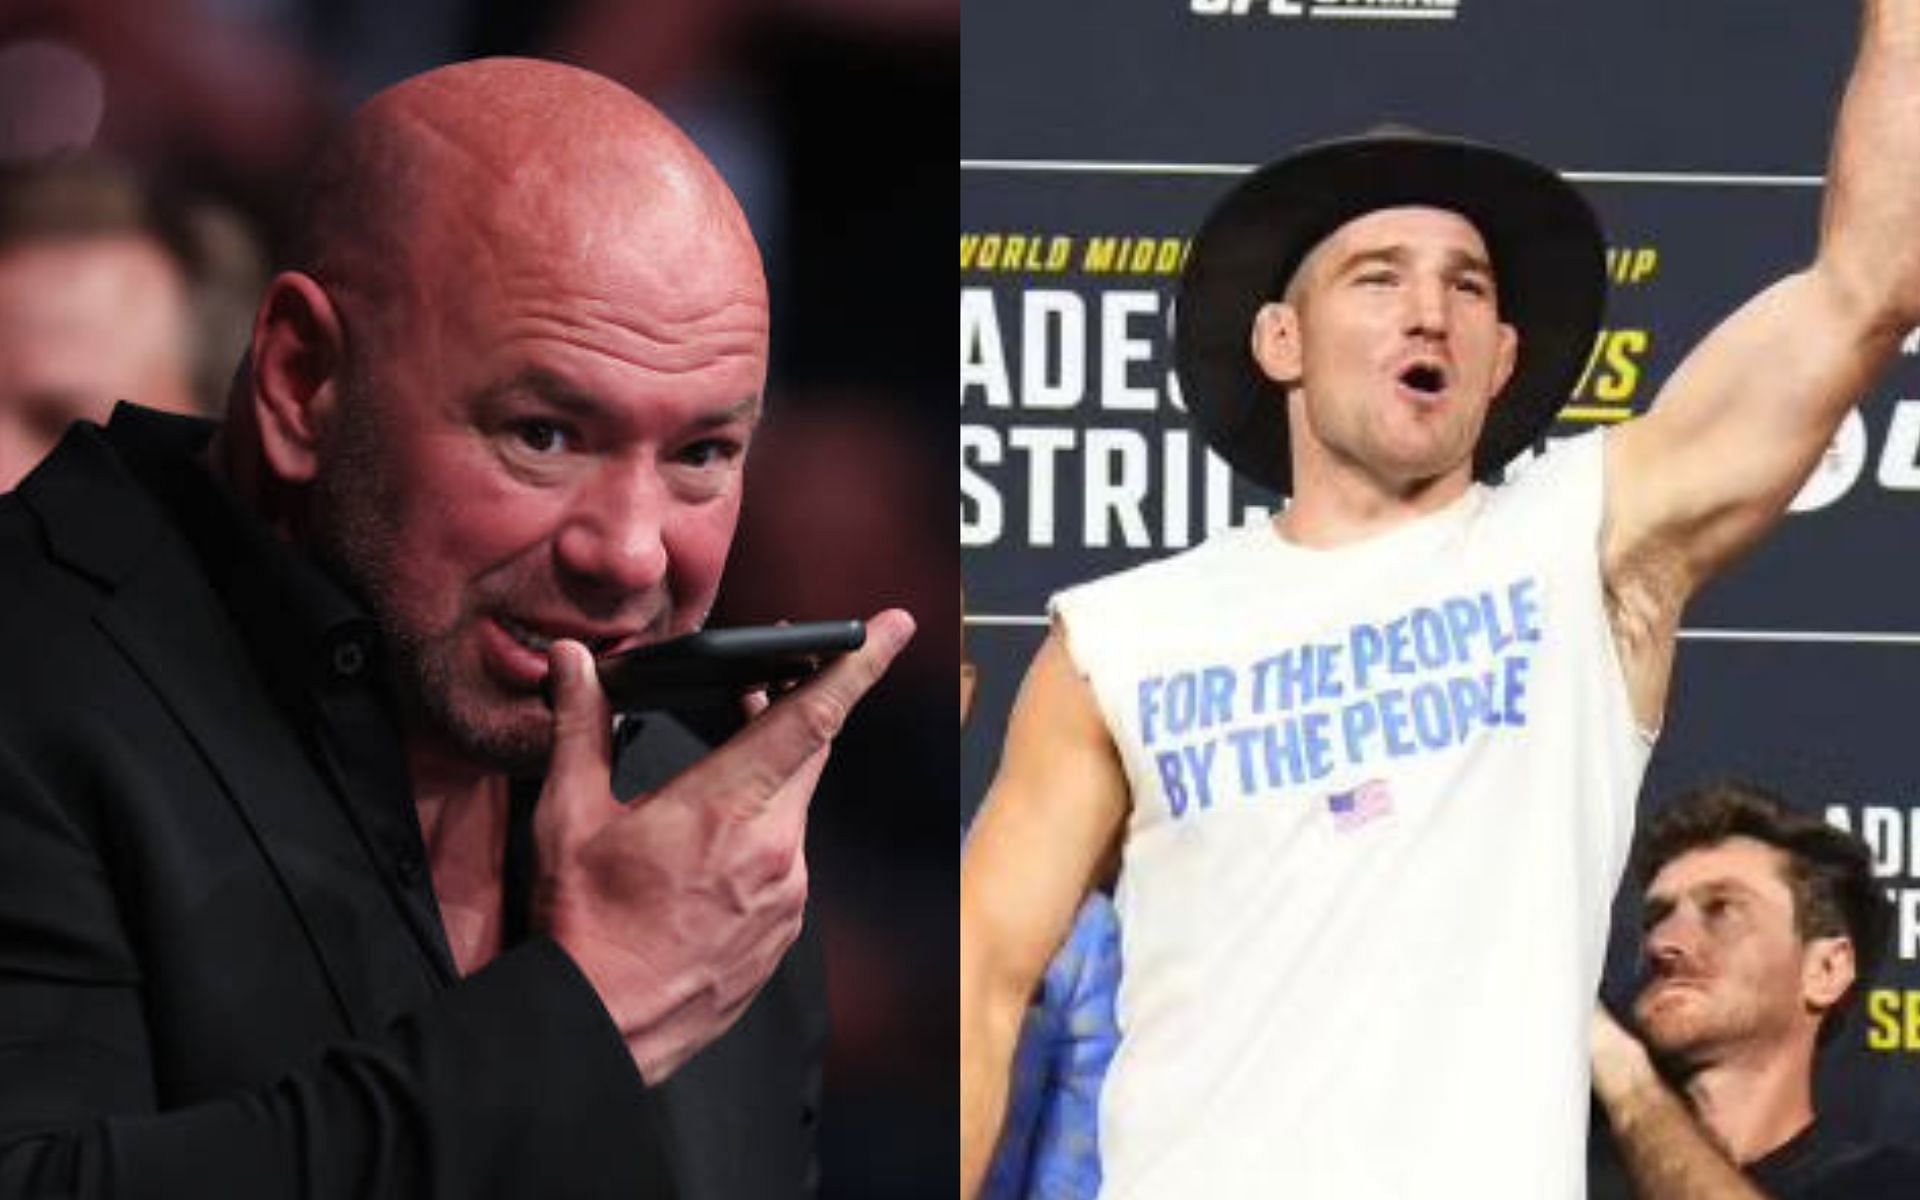 Dana White ringside (left) and Sean Strickland at a weigh-in (right) (Images courtesy @ufc and @stricklandmma on Instagram)